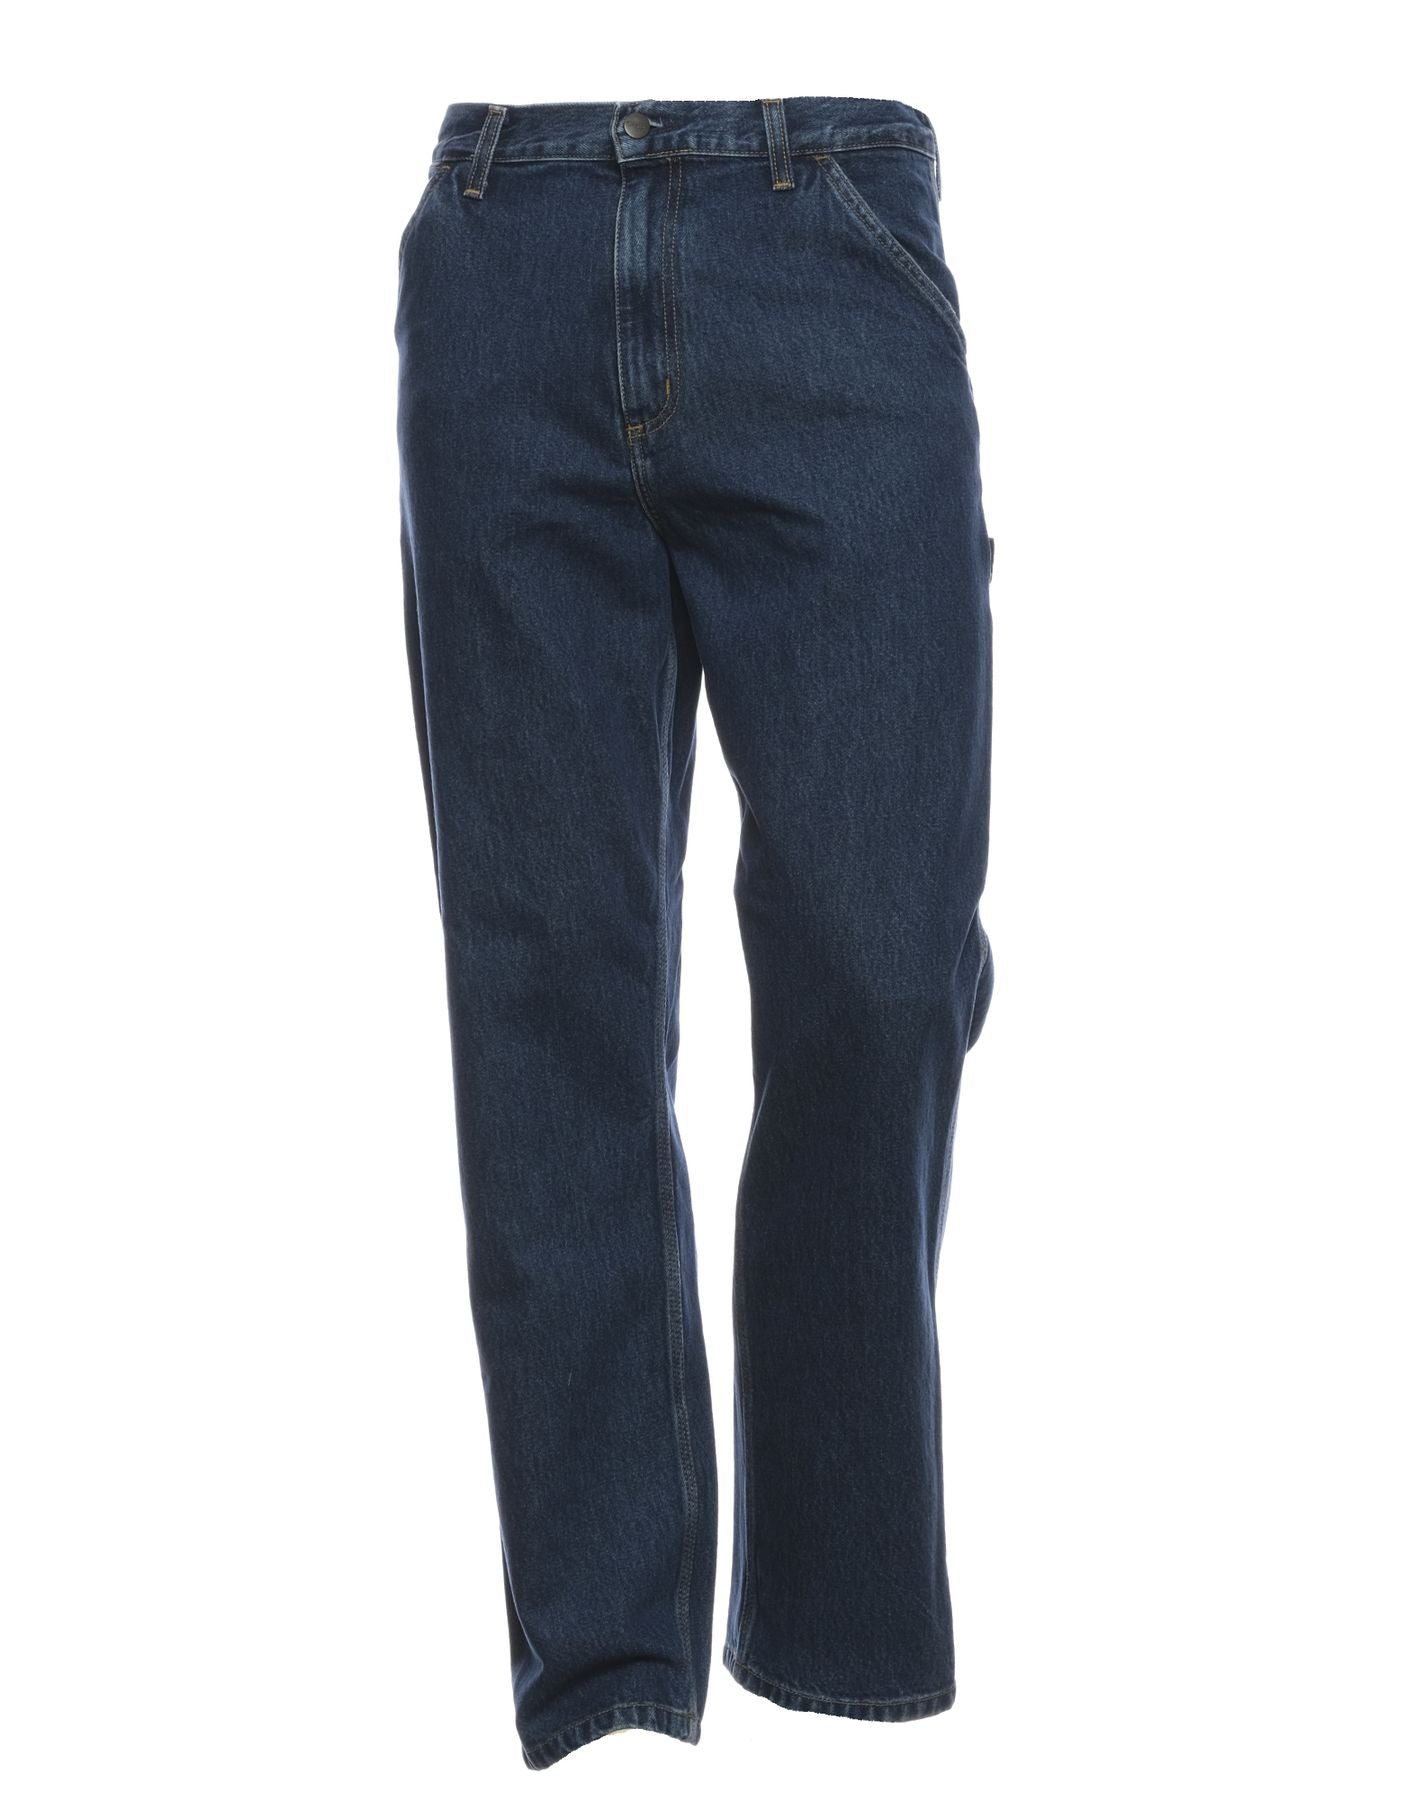 Jeans for man I032024 BLUE STONE WASHED CARHARTT WIP